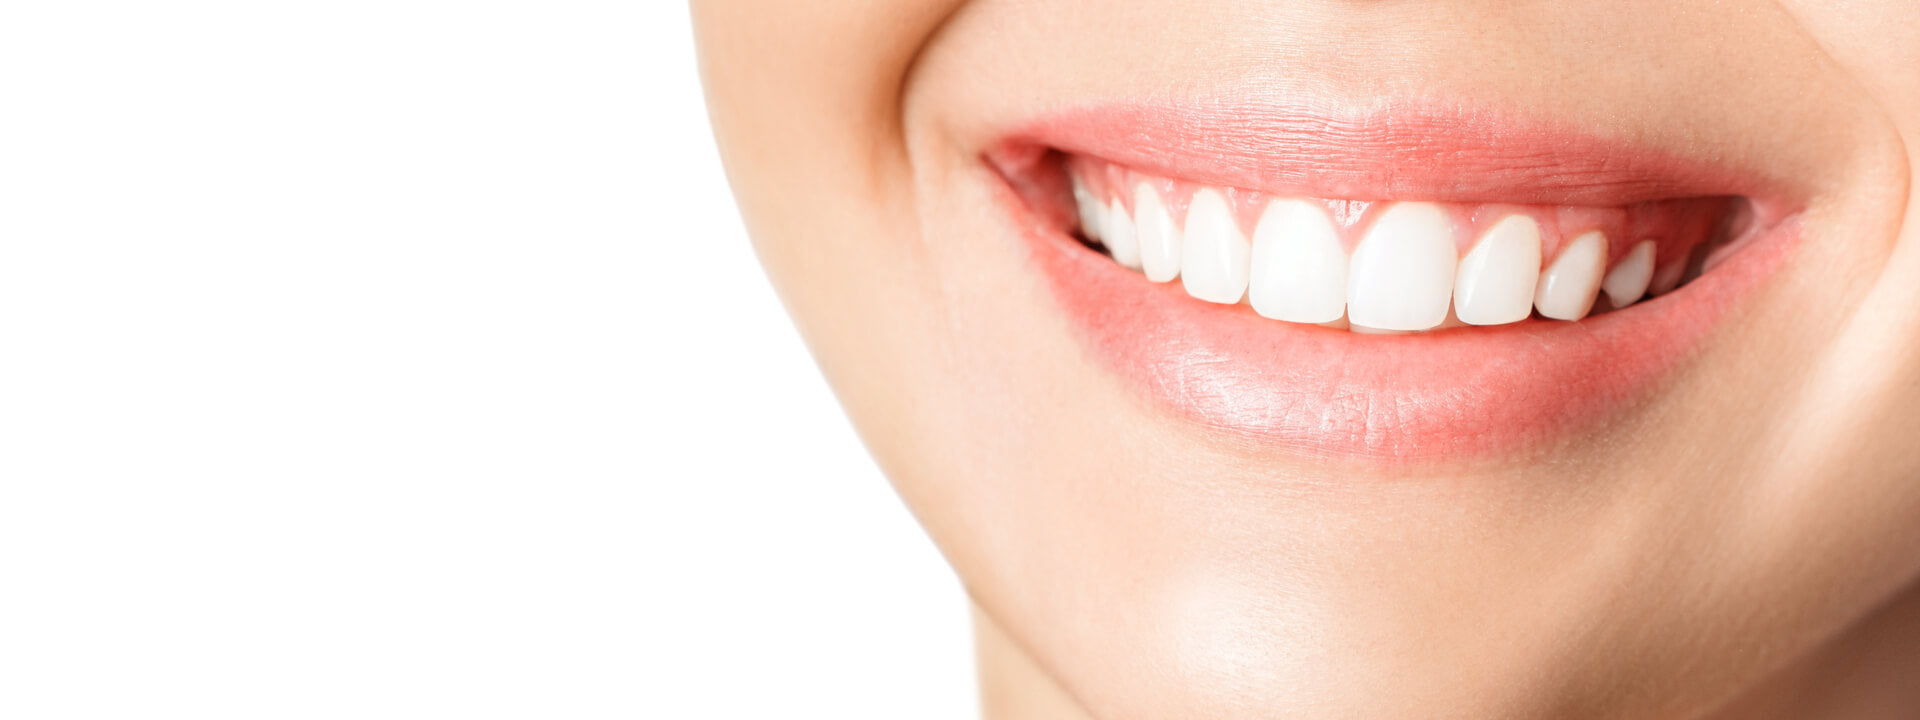 How do you whiten your teeth?